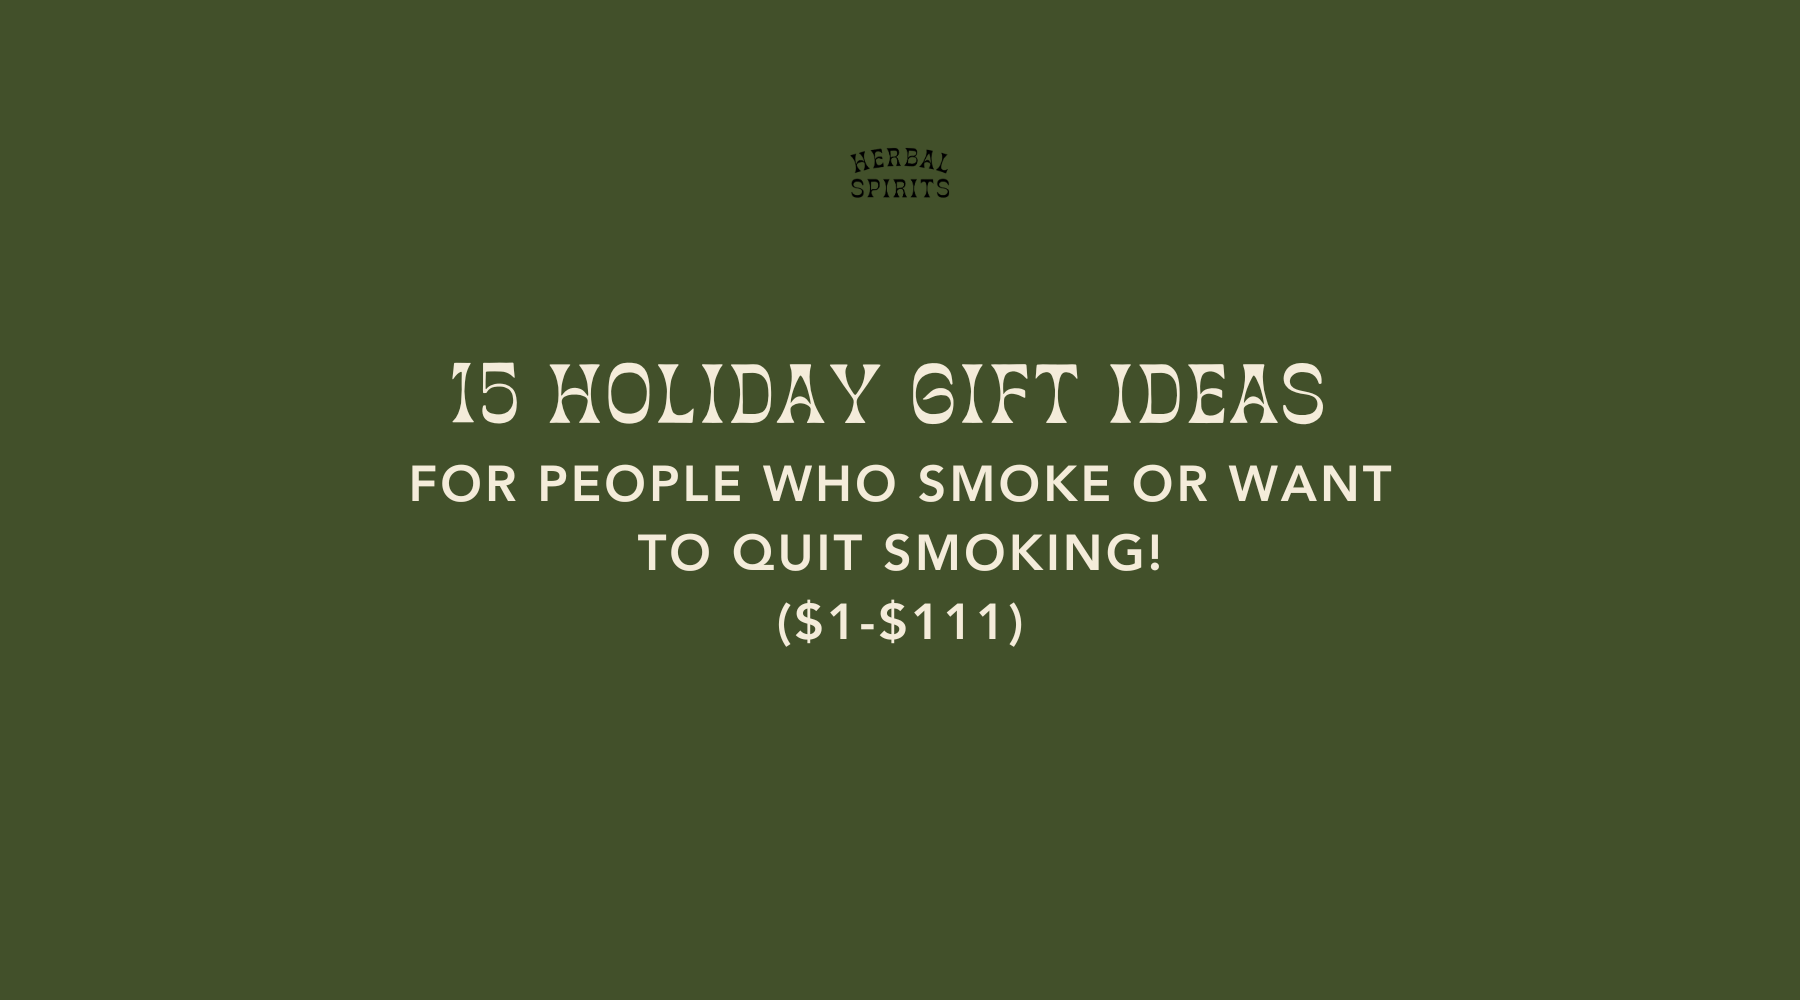 15 Holiday Gift Ideas For People Who Smoke OR want to QUIT smoking! ($1-$111)